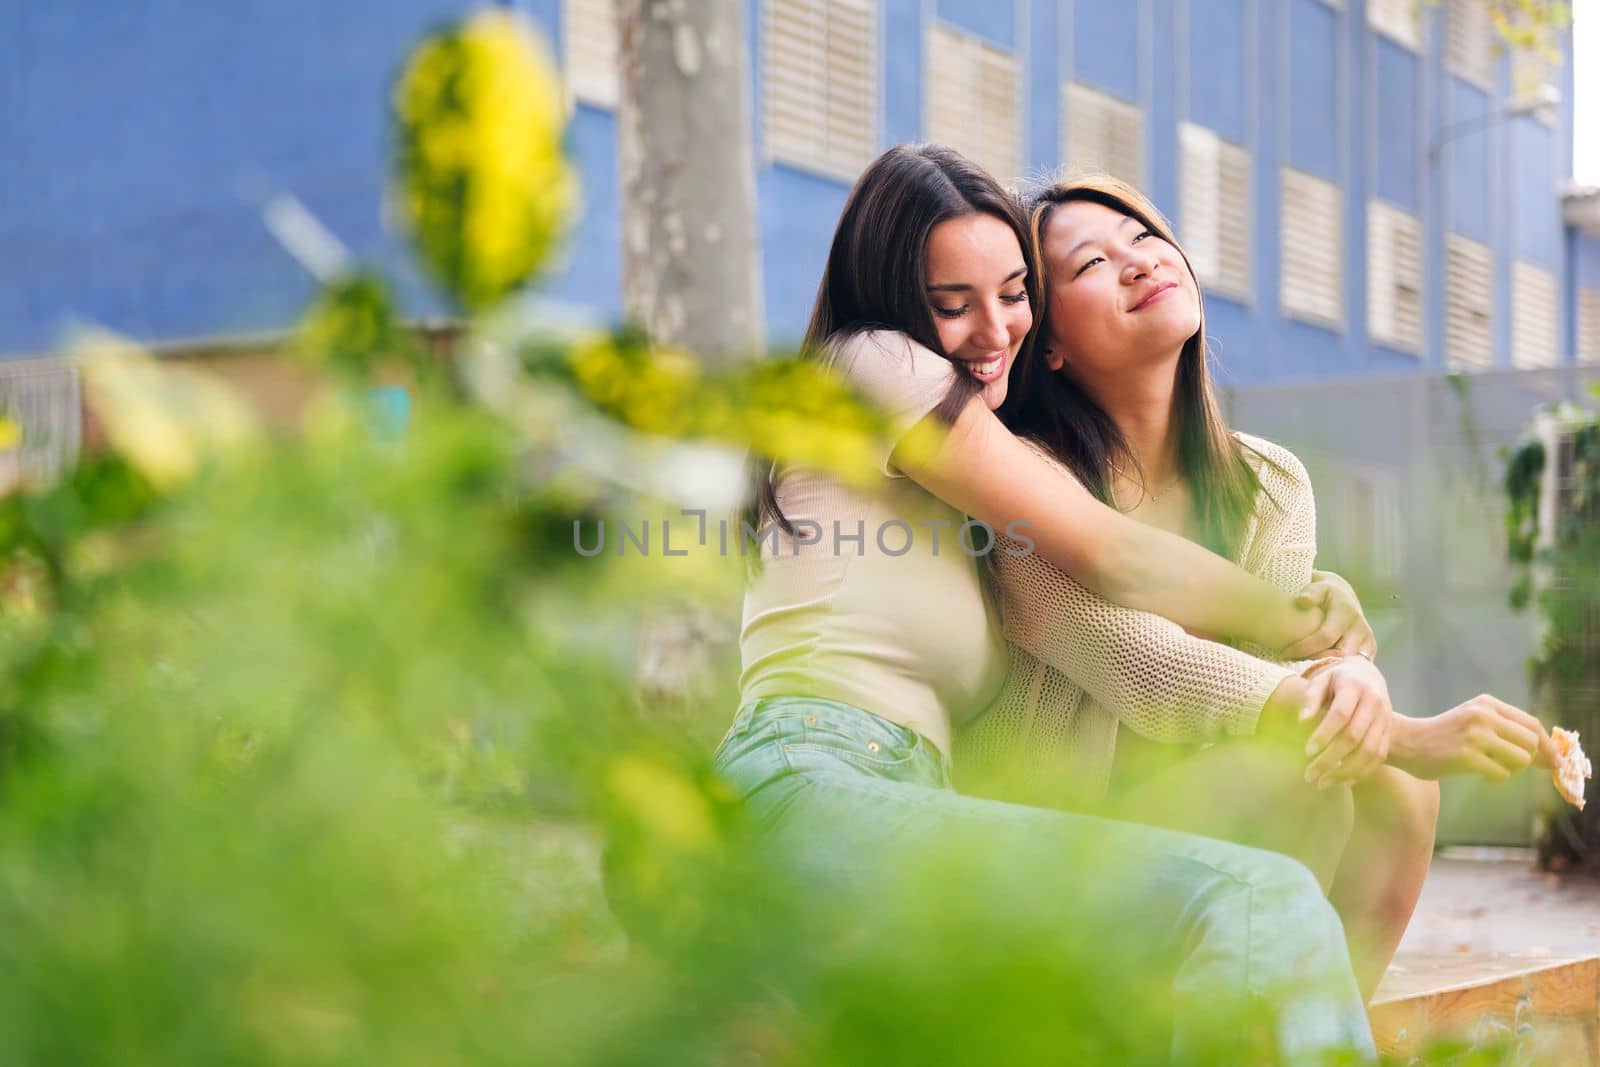 couple of young women embracing each other sitting in a city park, concept of friendship and love between people of the same sex